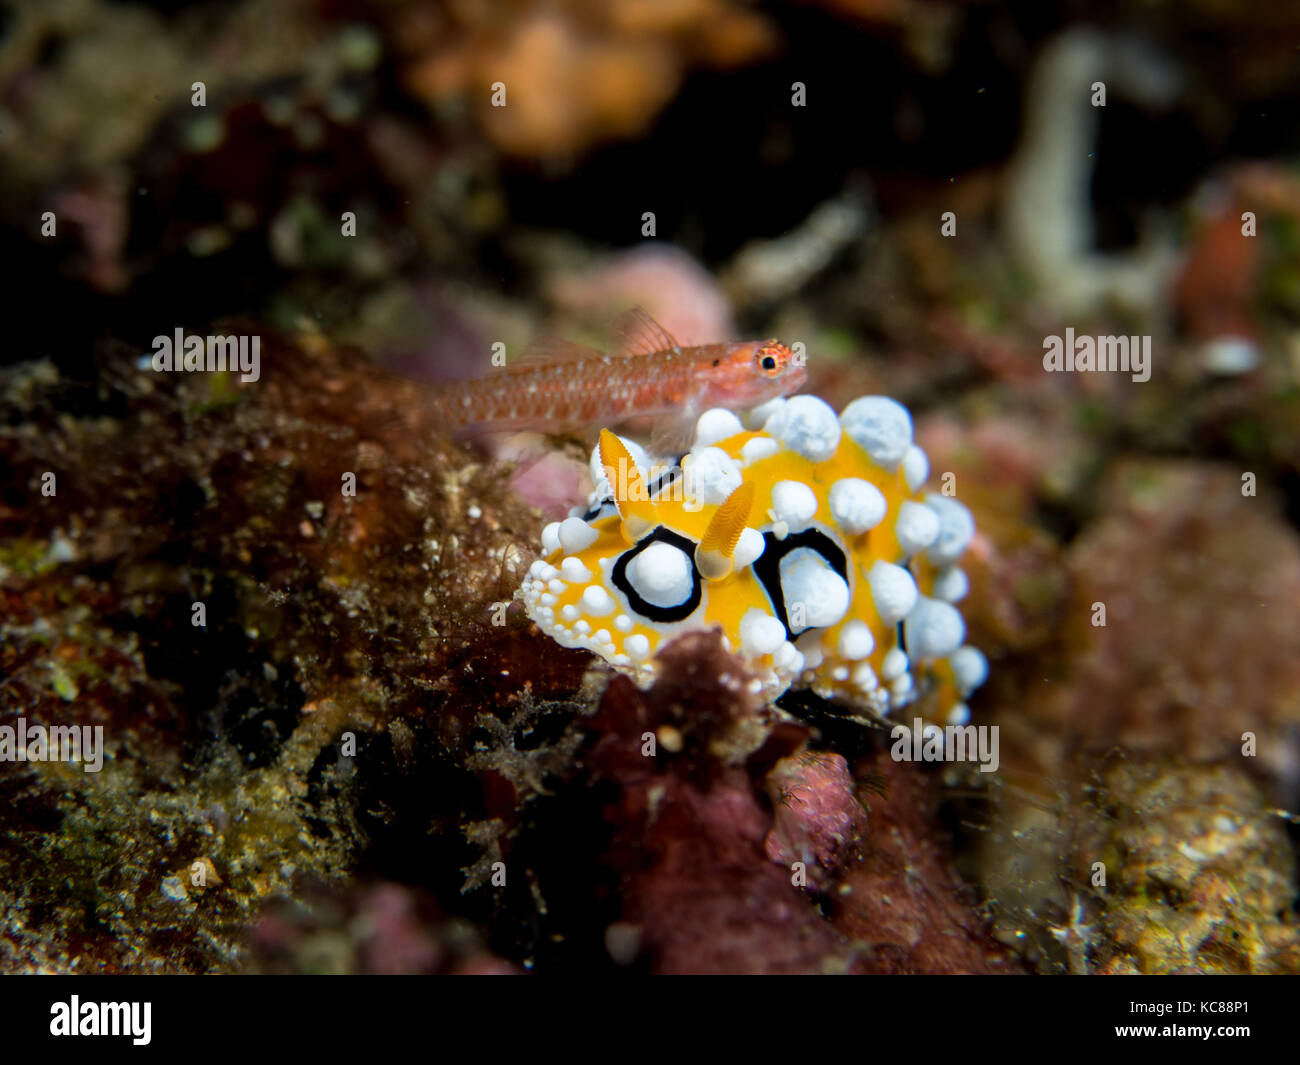 Phyllidia ocellata nudibranch with small goby on a coral reef Stock Photo